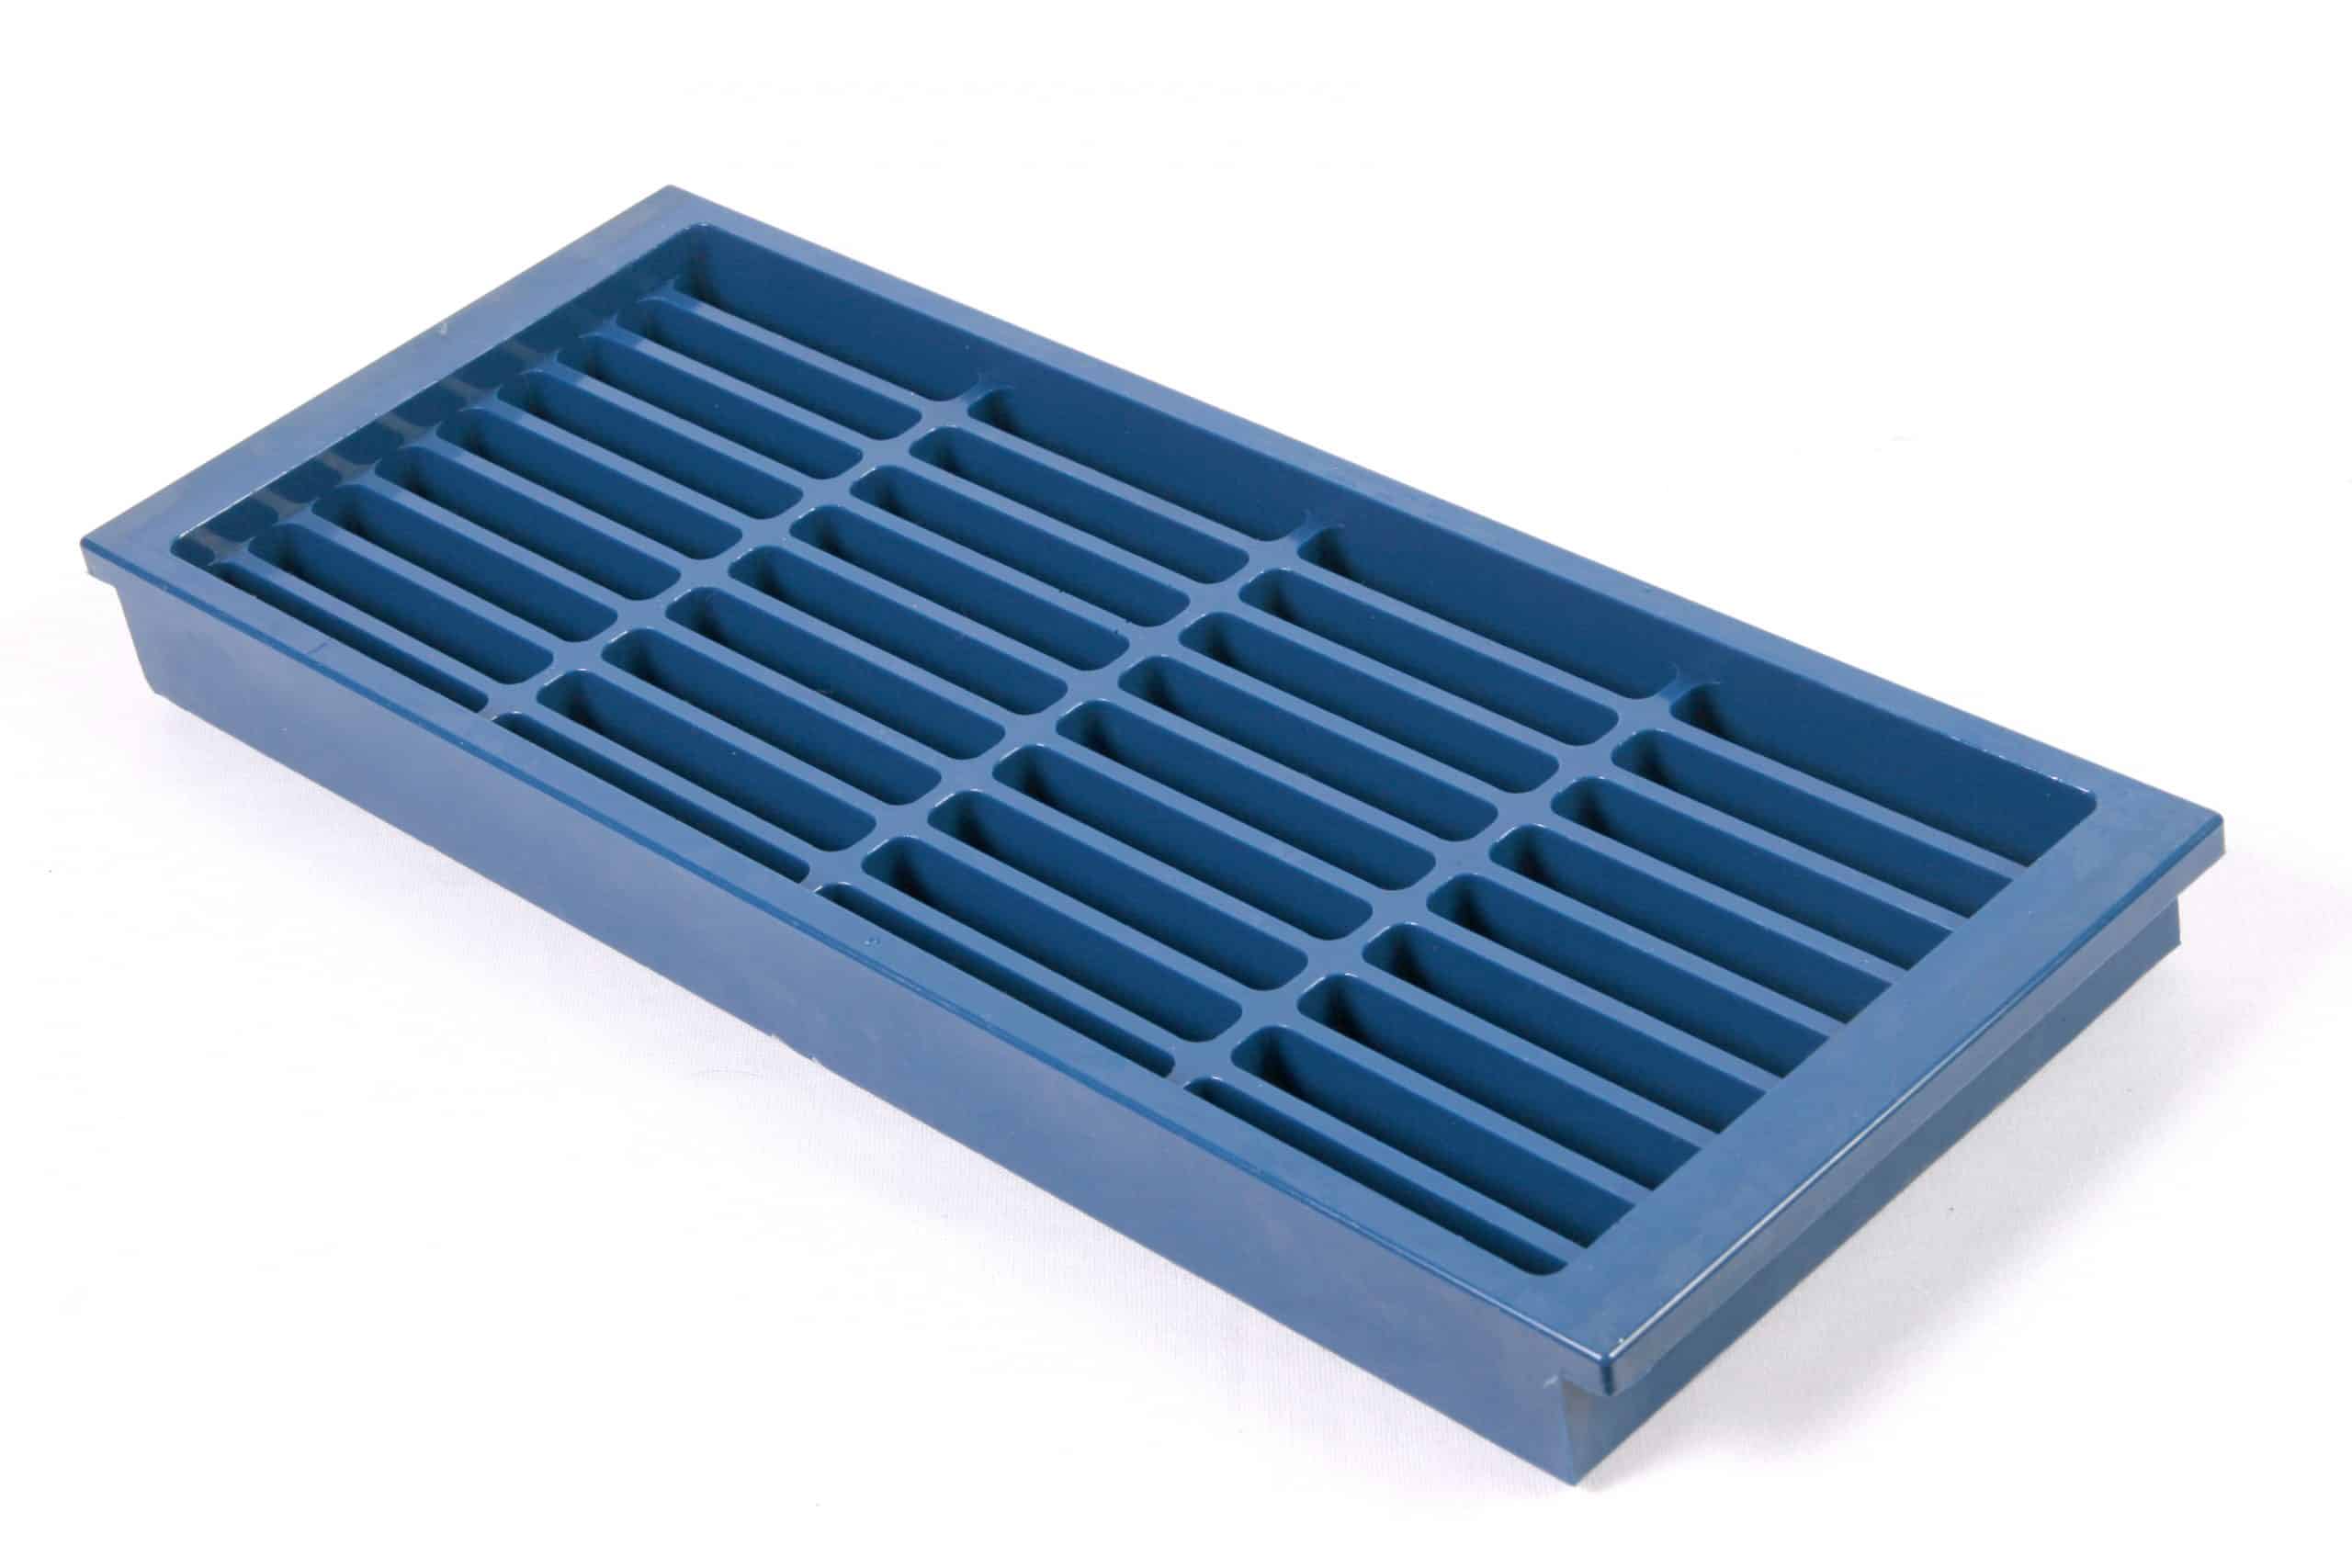 Urethane tool tray with 36 slots for drills.